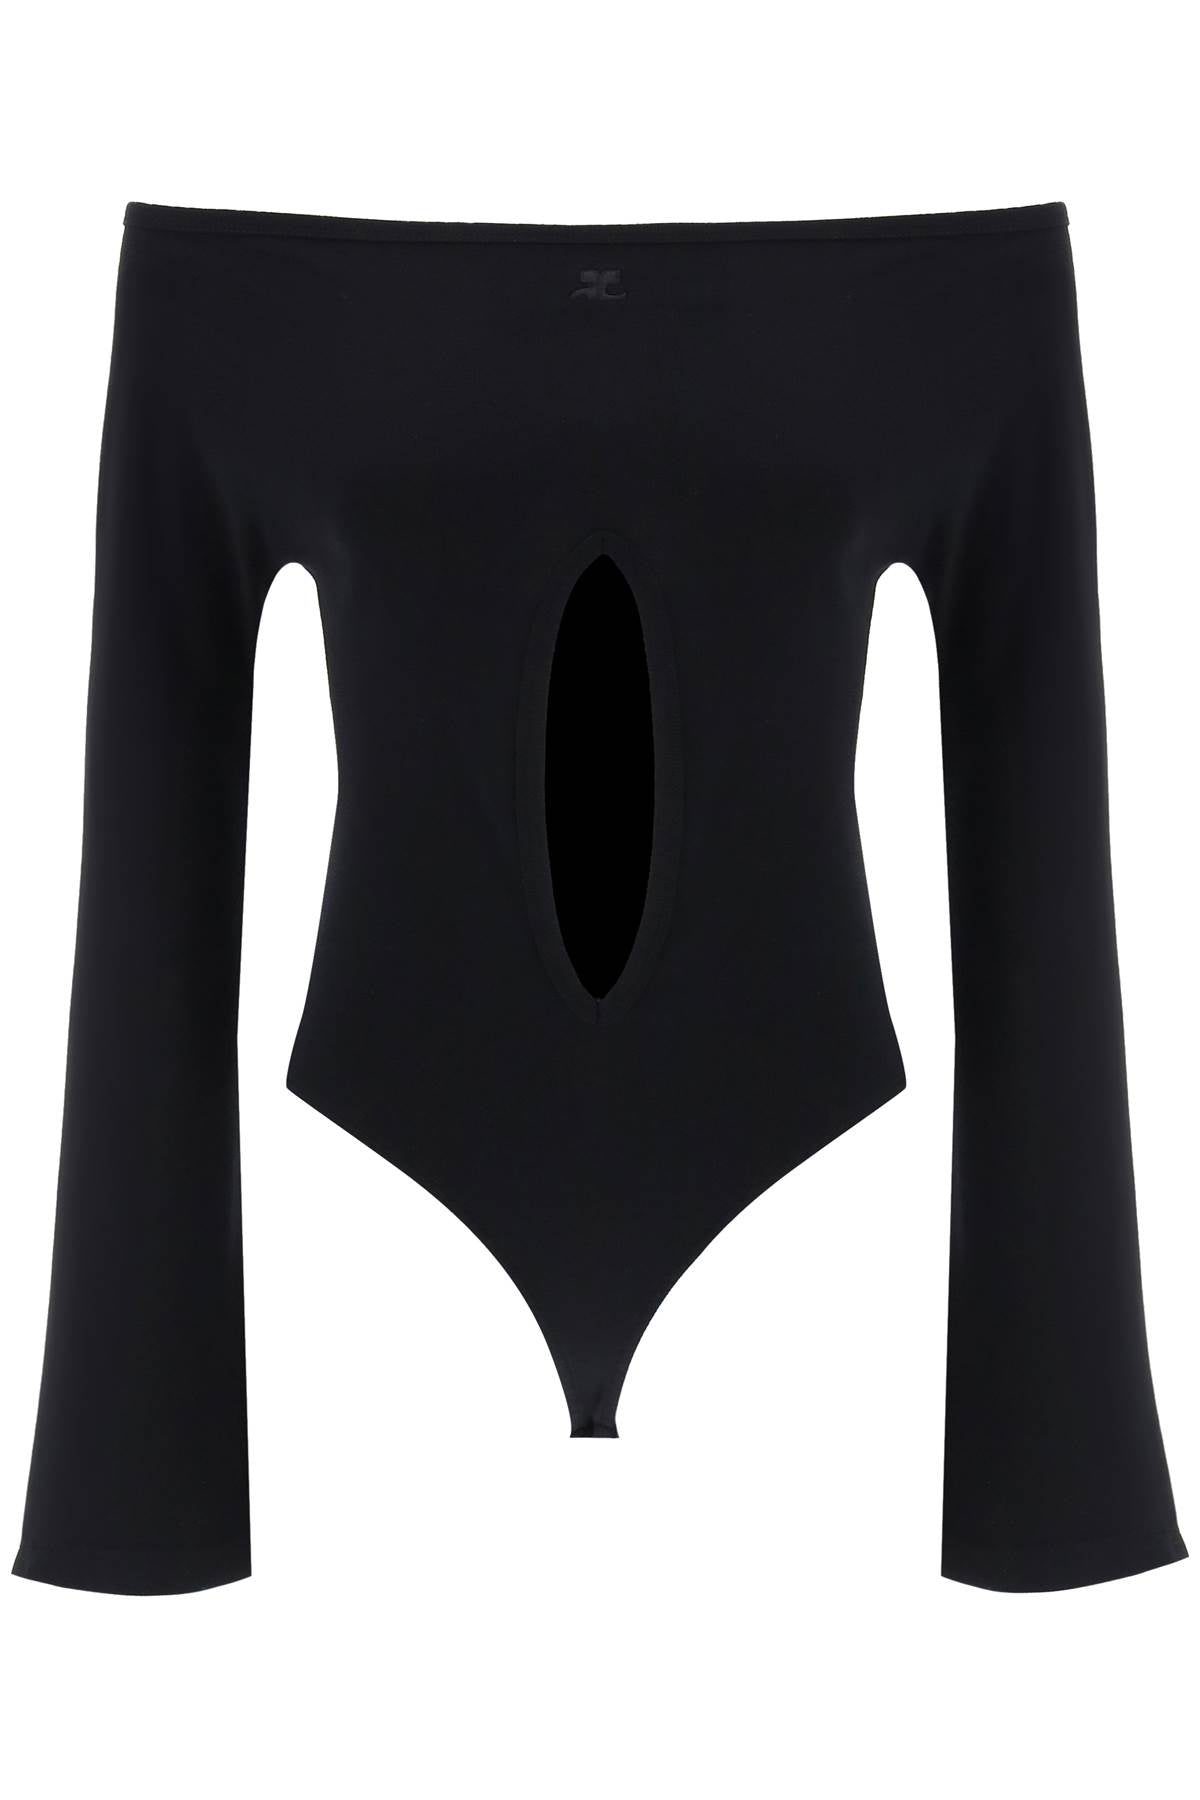 Courreges "jersey body with cut-out-0